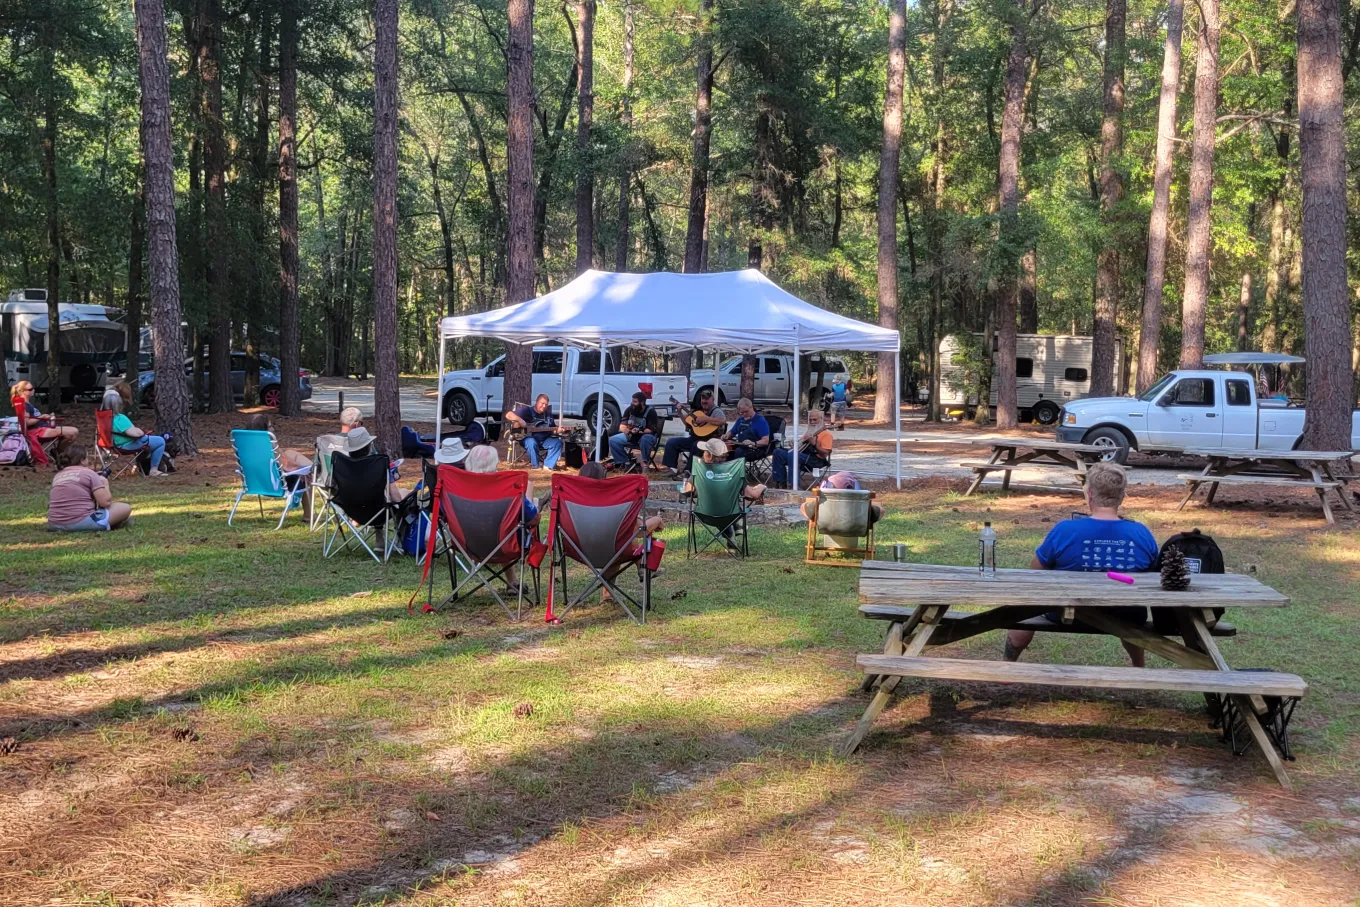 crowd of people in camping chairs